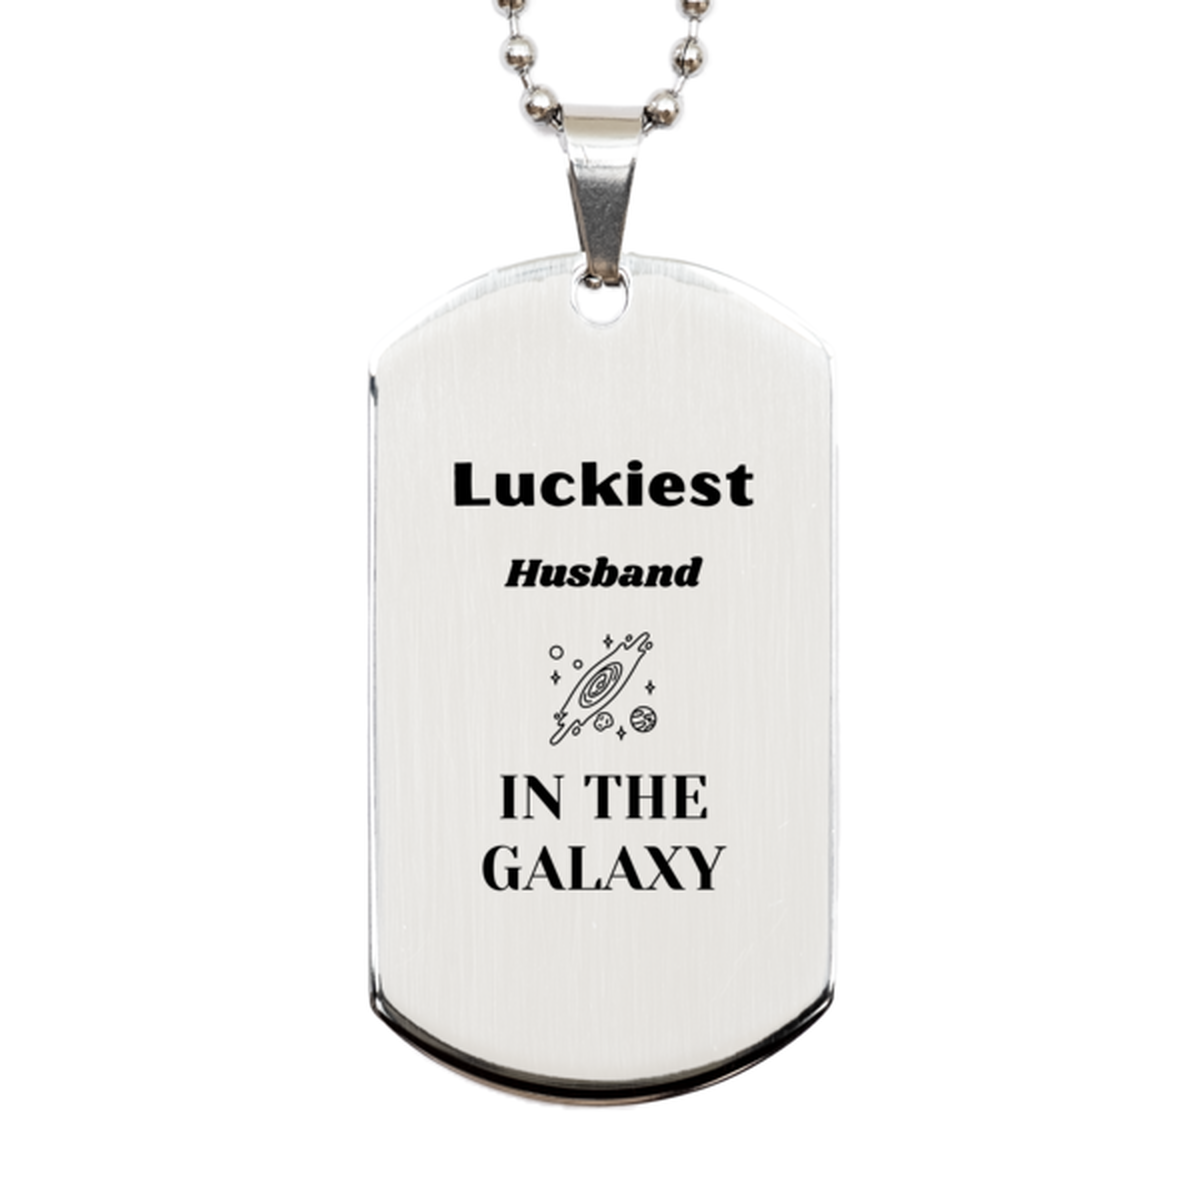 Luckiest Husband in the Galaxy, To My Husband Engraved Gifts, Christmas Husband Silver Dog Tag Gifts, X-mas Birthday Unique Gifts For Husband Men Women